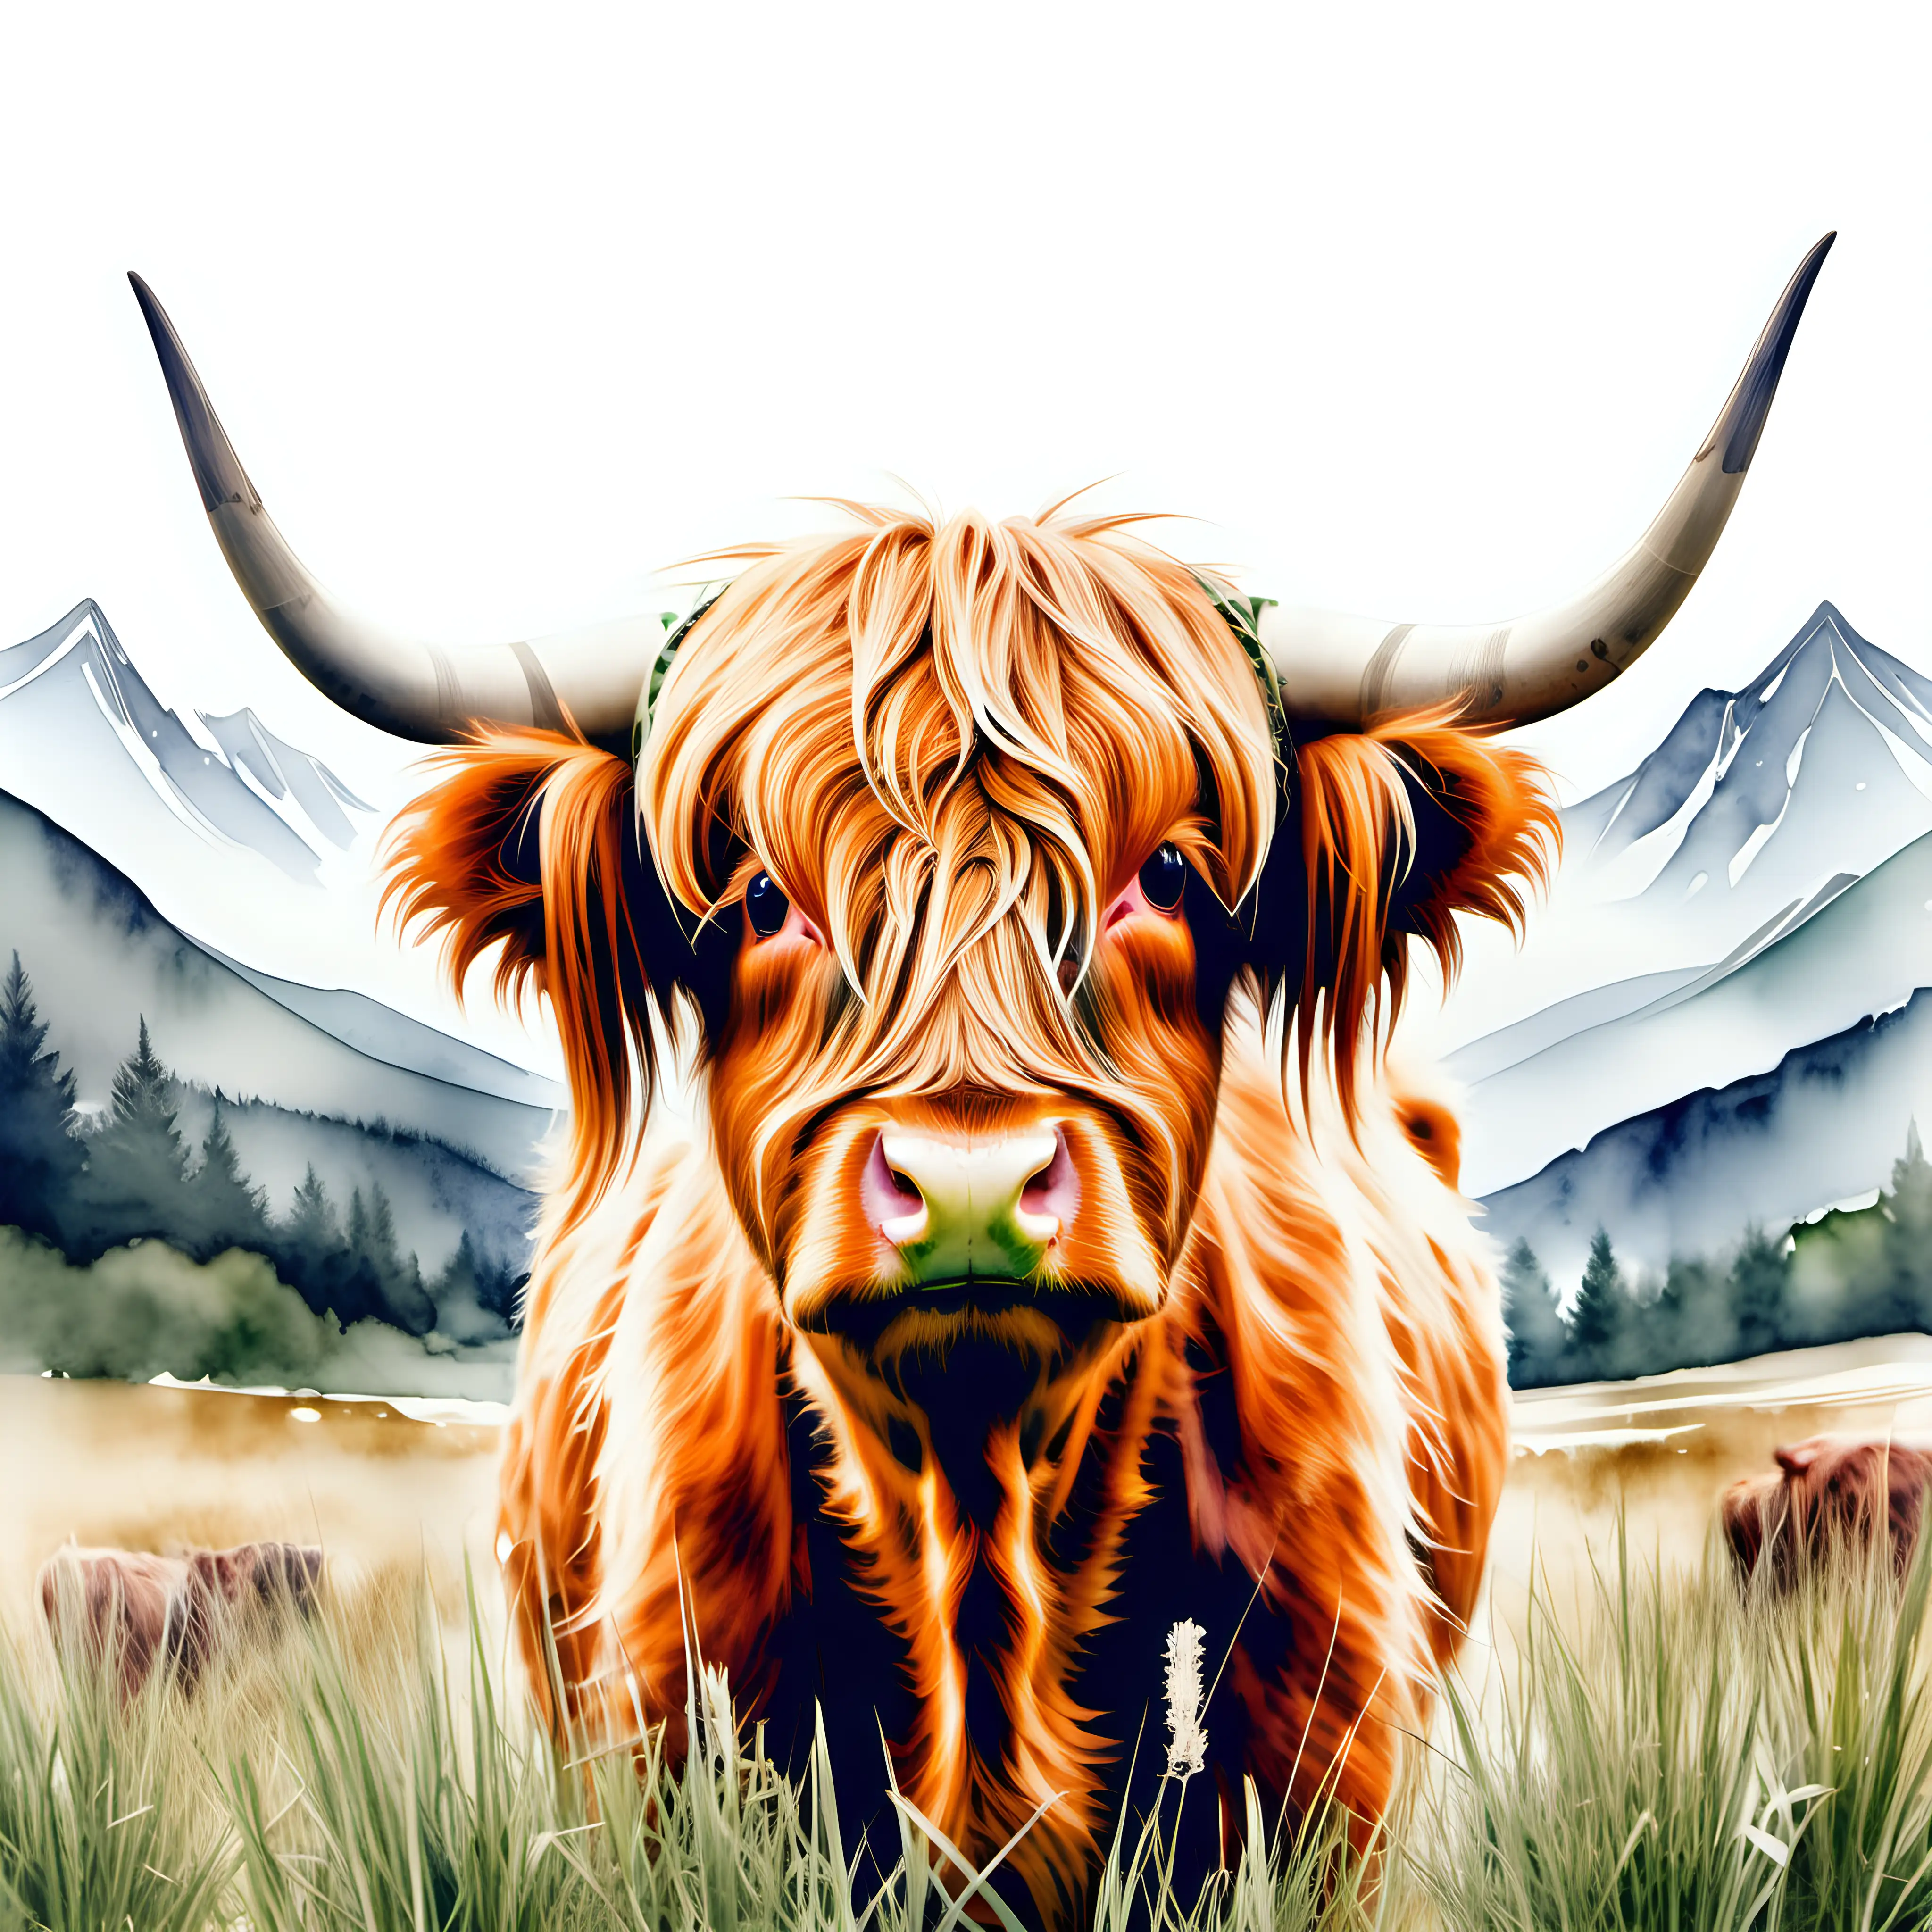 highland cow eating grass lookinginto the camera in a boho watercolor style

